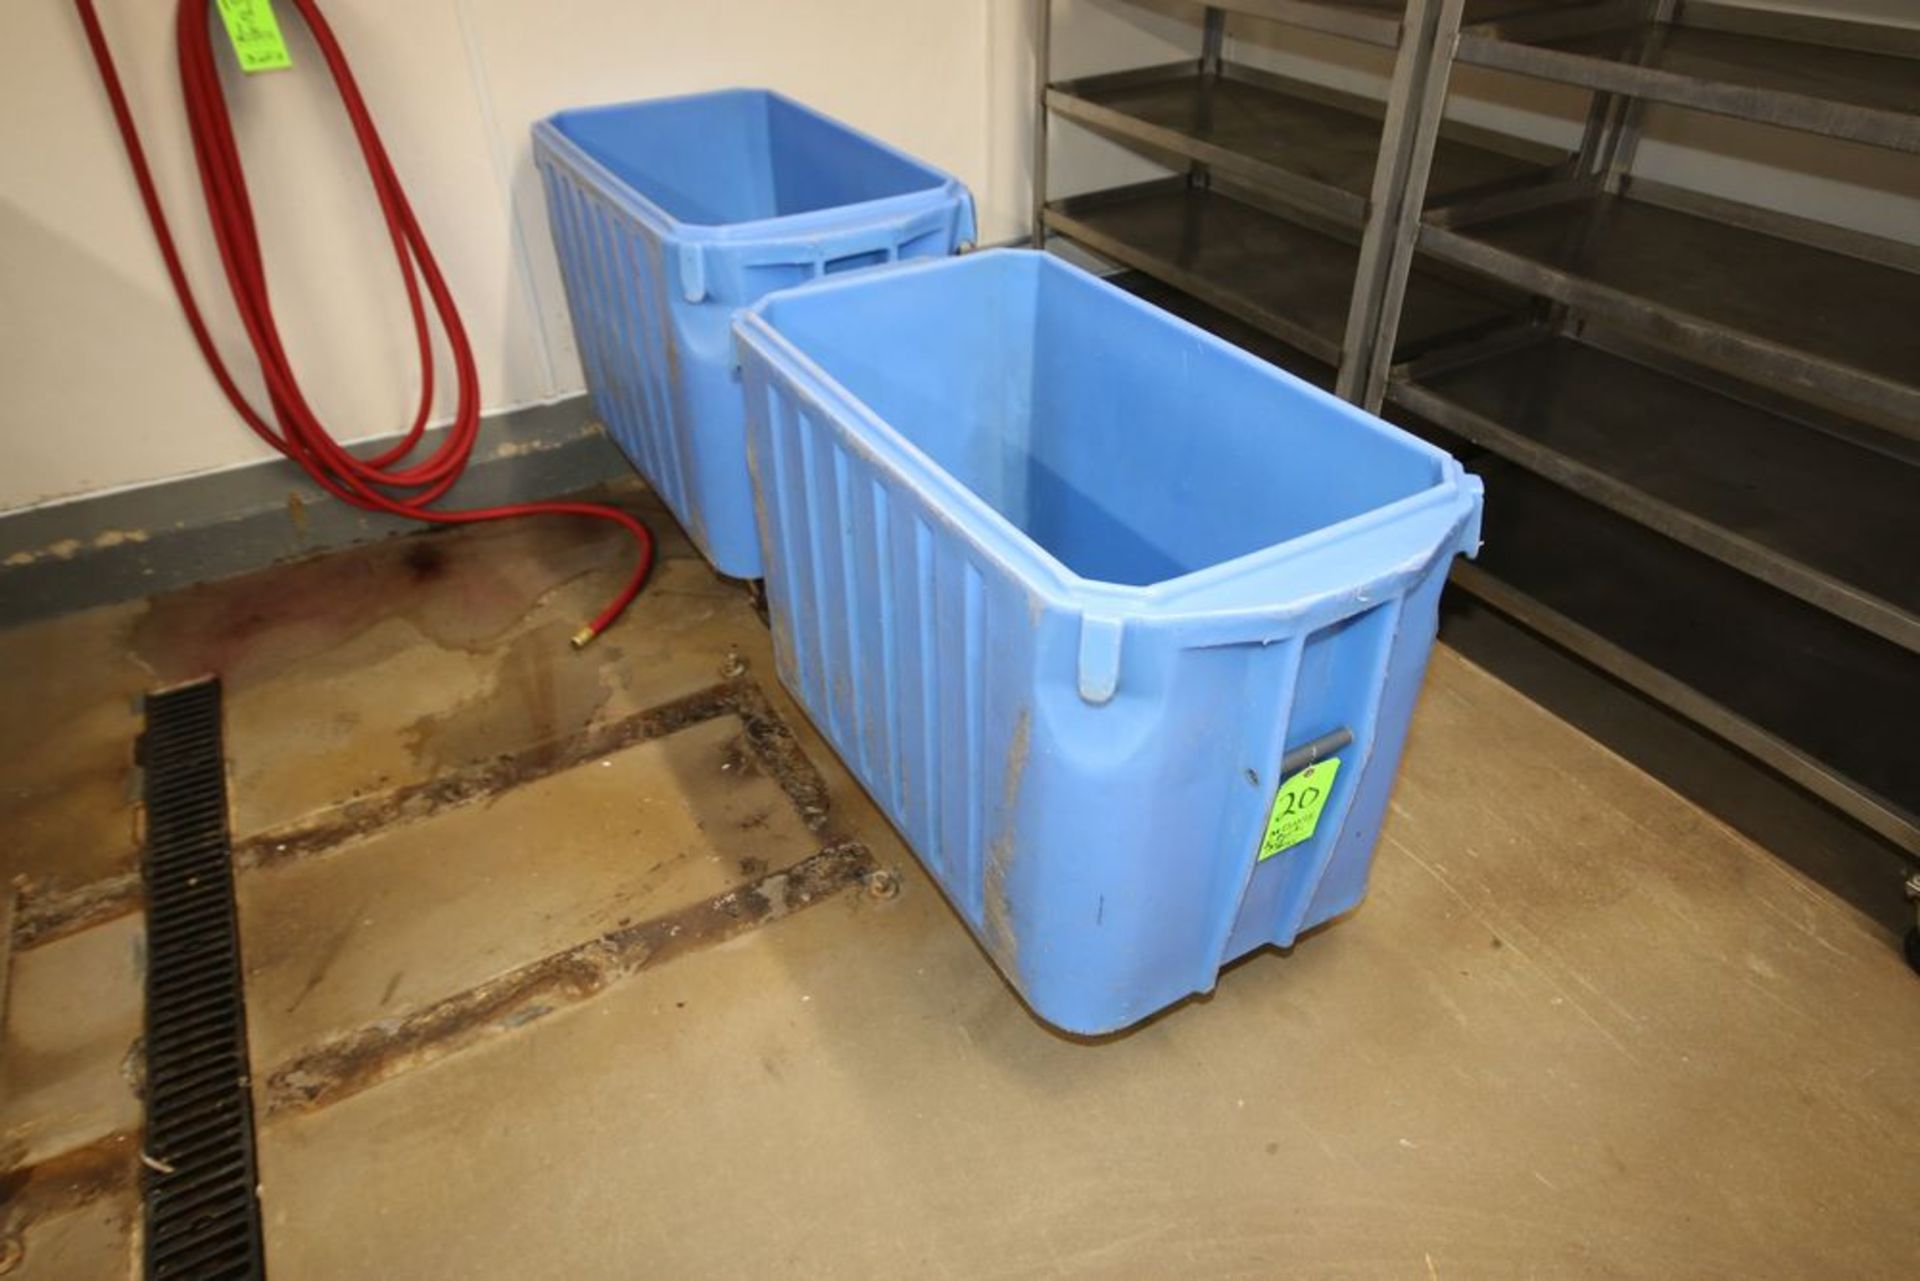 Portable Ice Bins, Mounted on Casters, Internal Dims.: Aprox. 35-1/2" L x 19" W x 24" Deep (